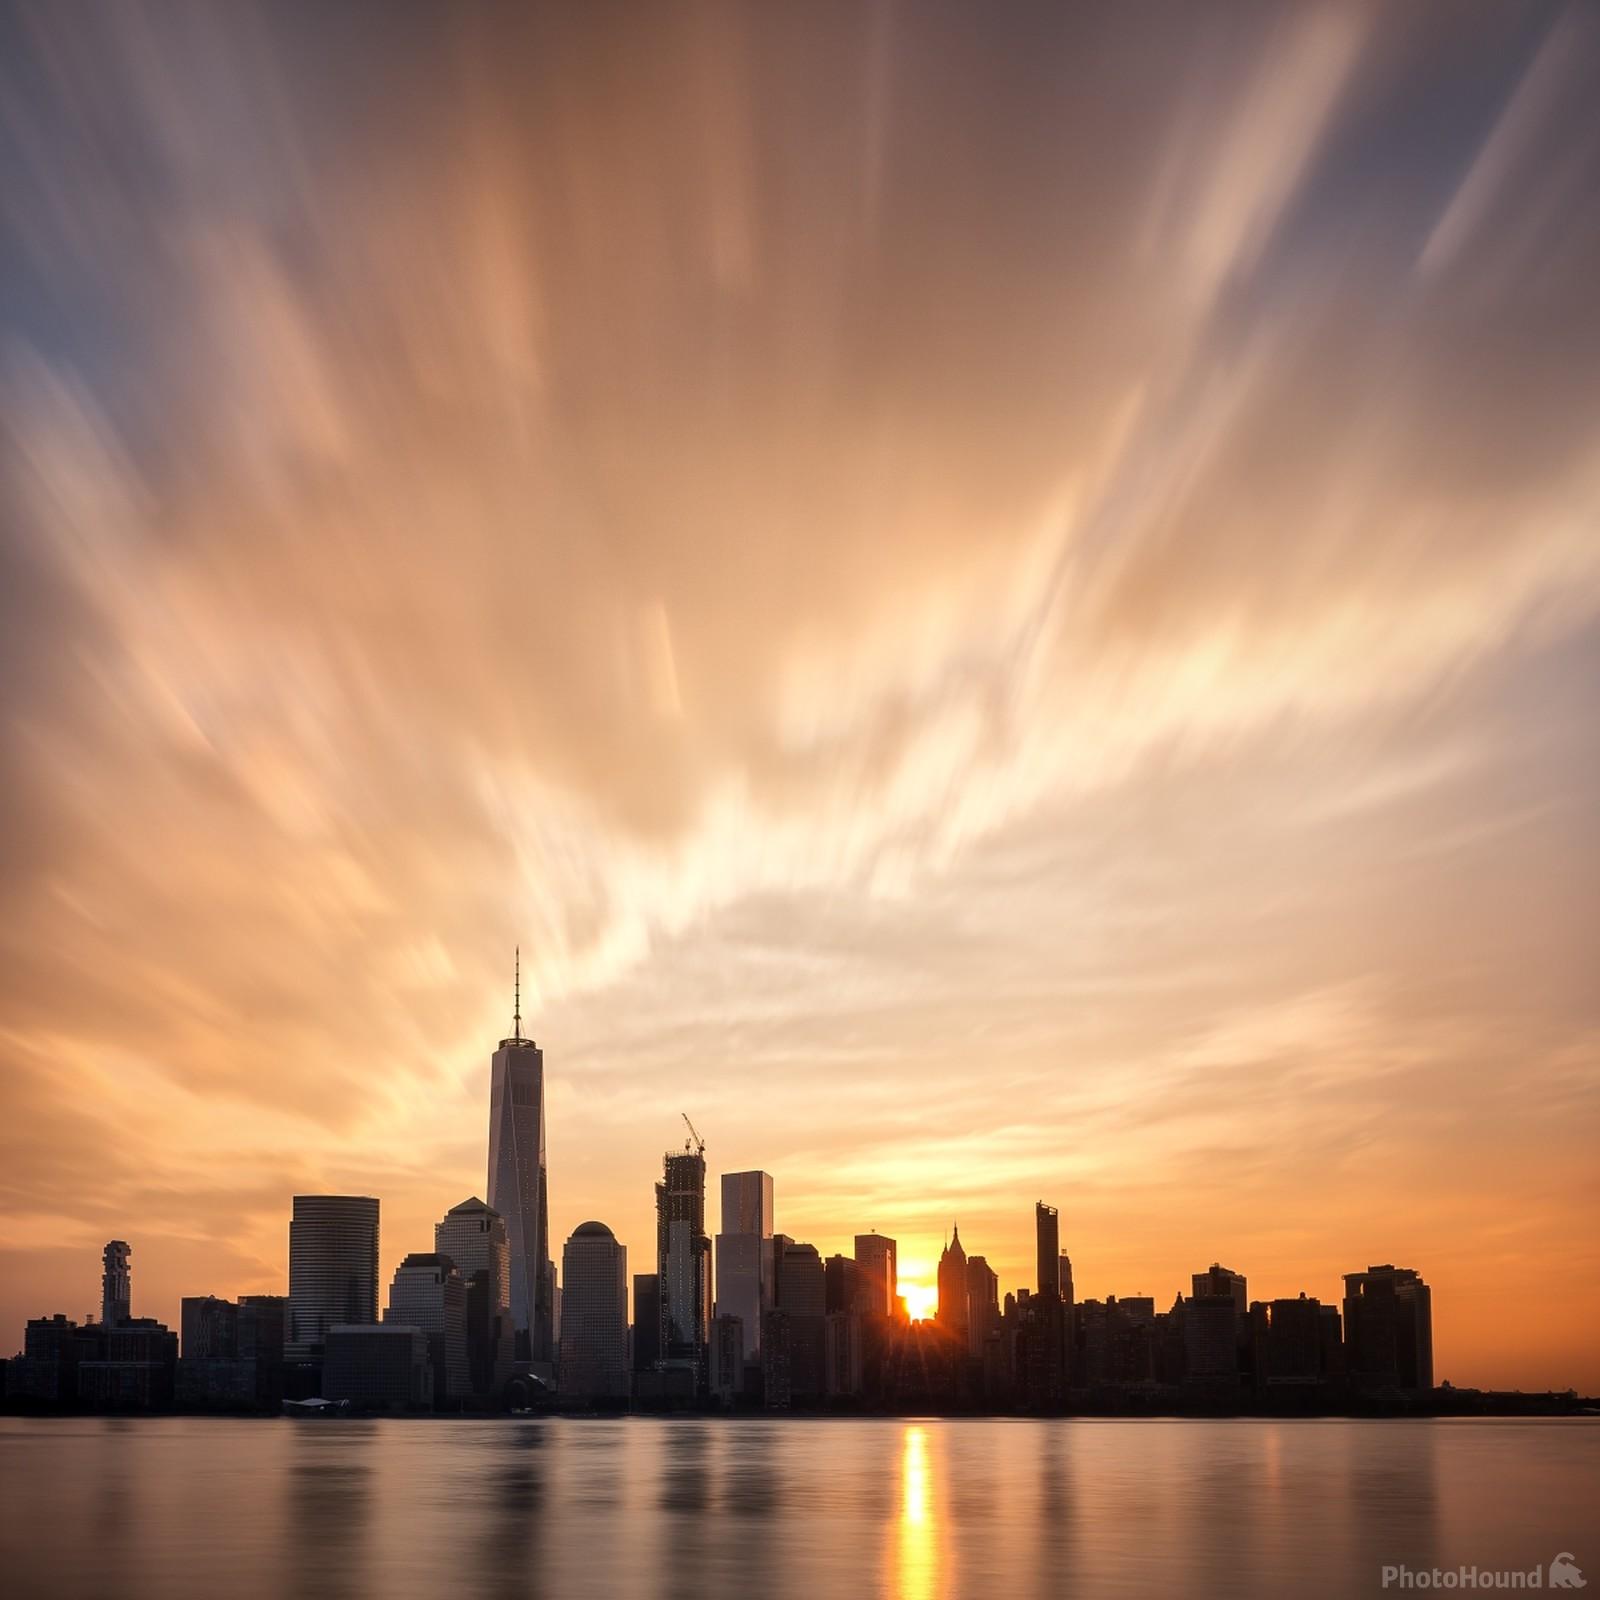 Image of Lower Manhattan from New Jersey (Exchange Place) by VOJTa Herout